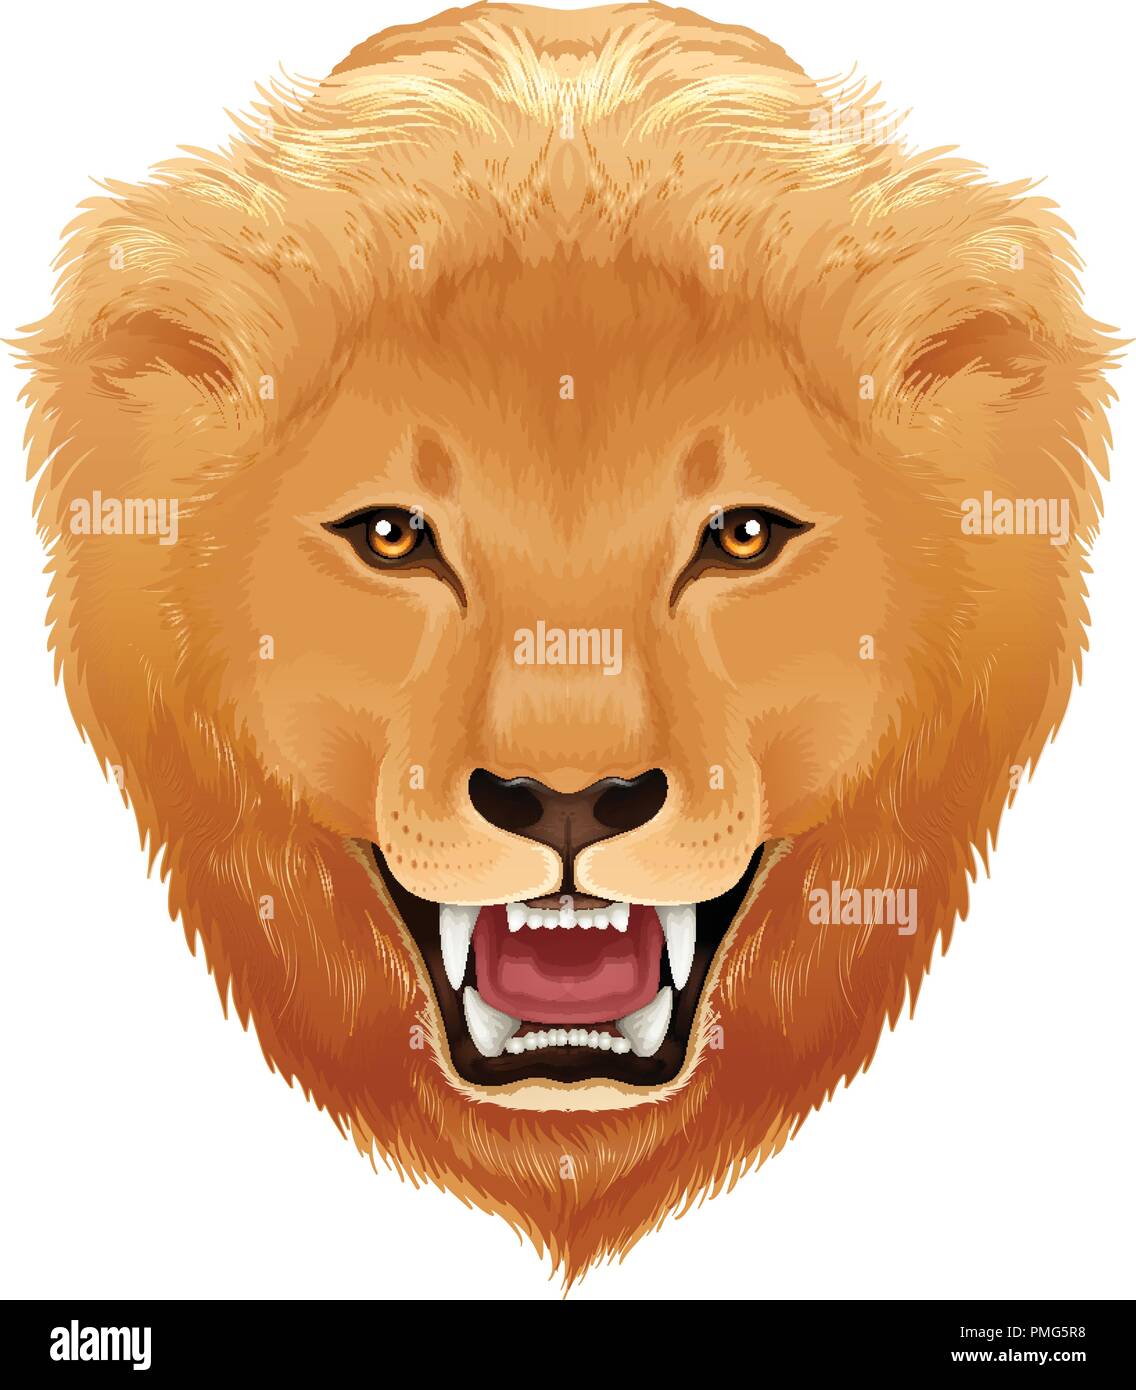 Lions head white background illustration Stock Vector